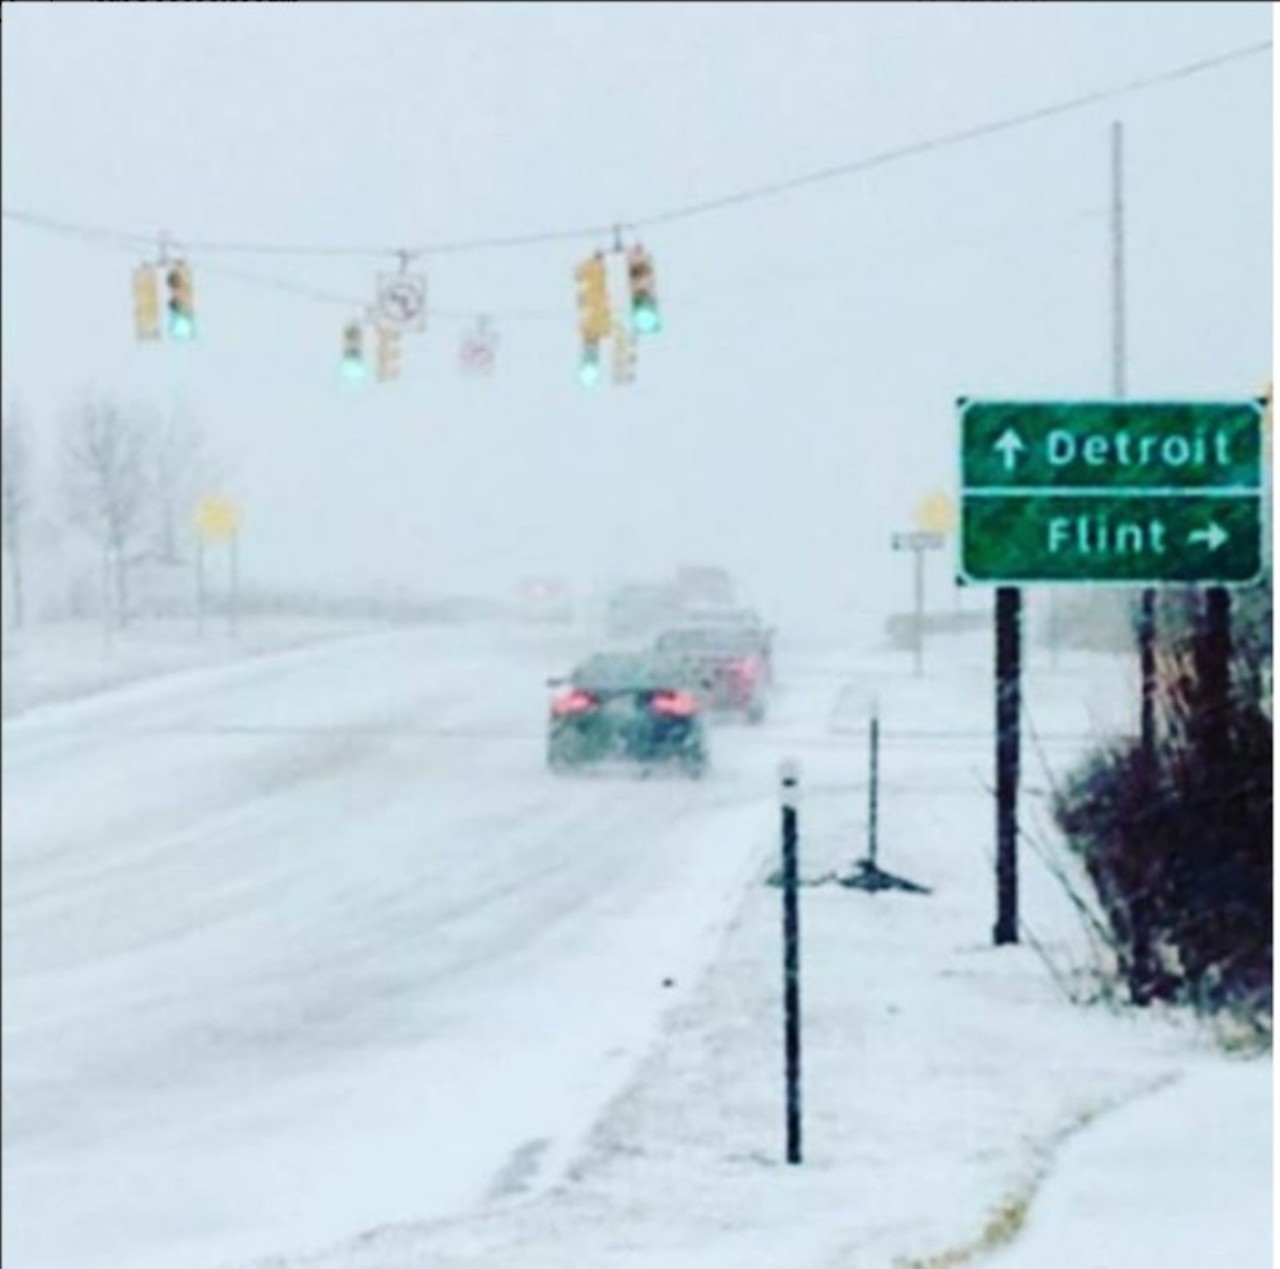 It&#146;s just snow! Learn how to drive, people!
Photo courtesy of @doubler39